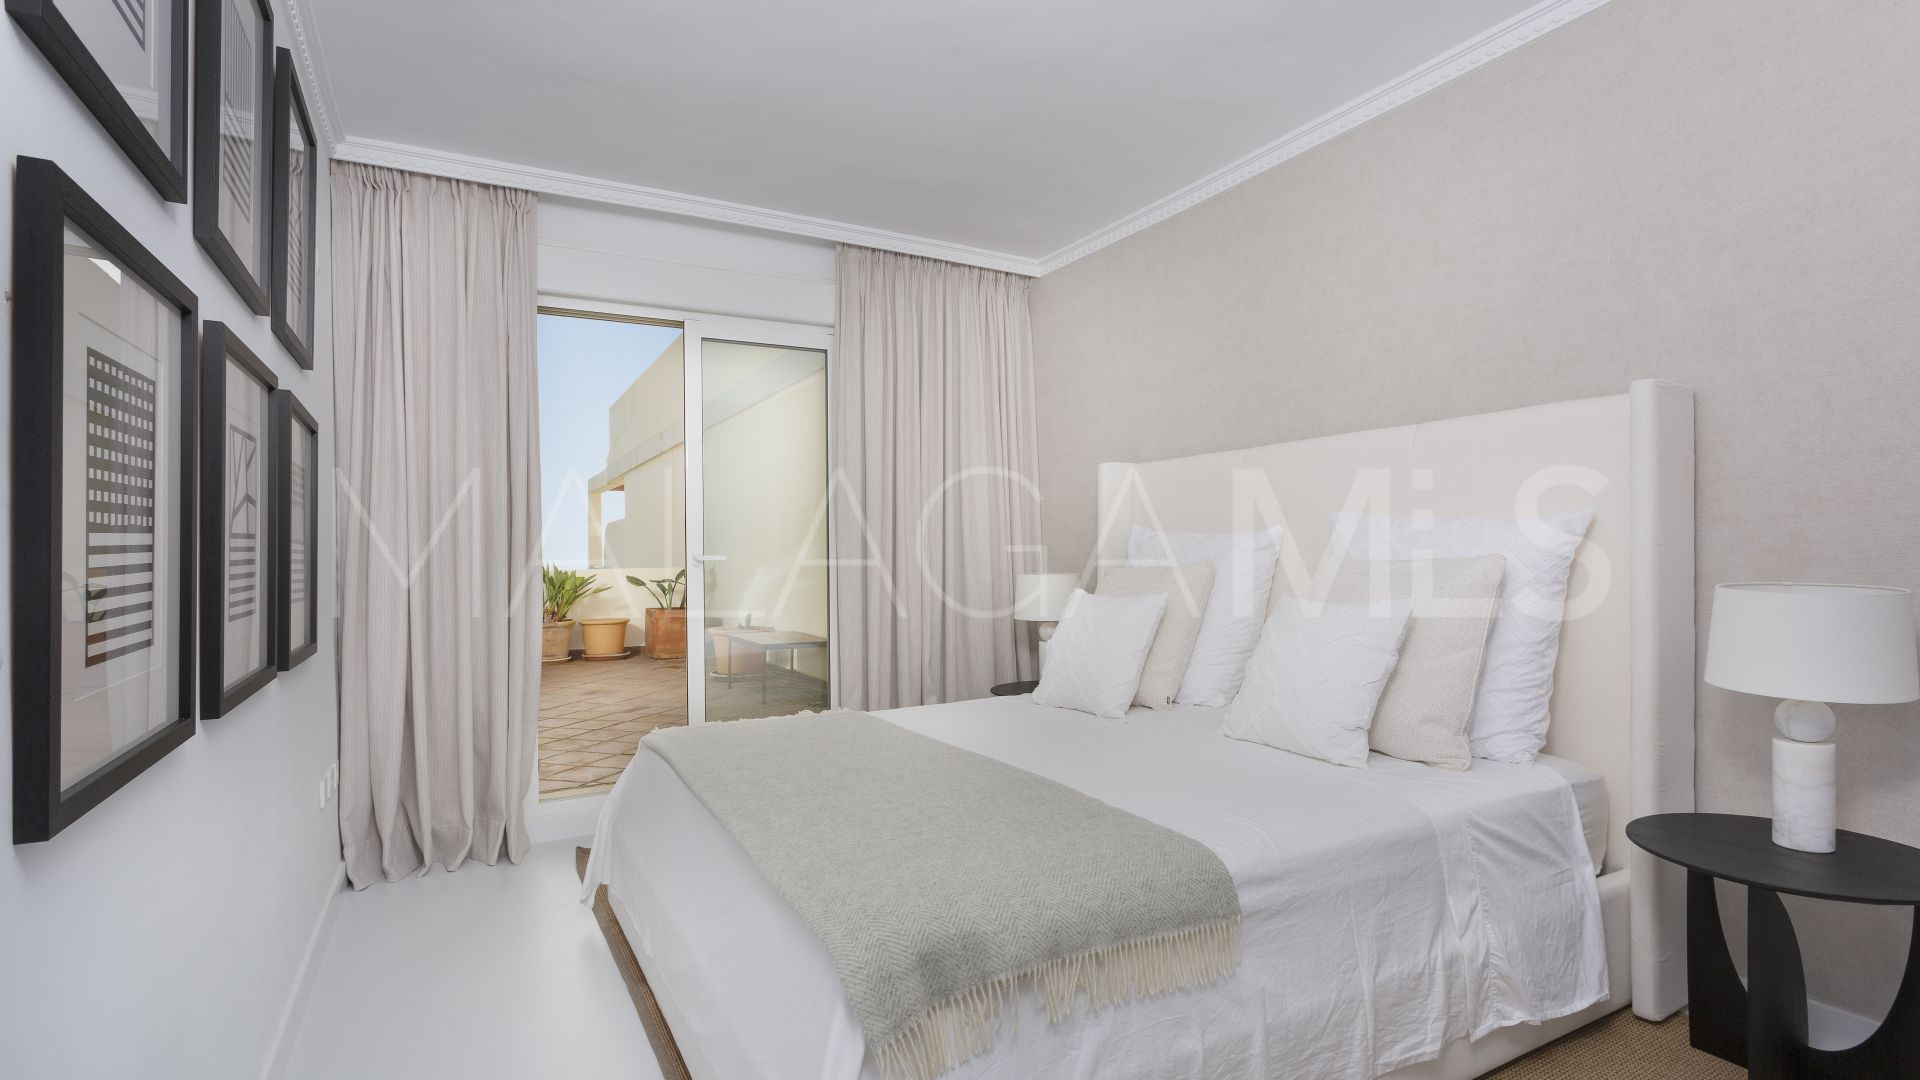 3 bedrooms duplex penthouse in Palacetes Los Belvederes for sale